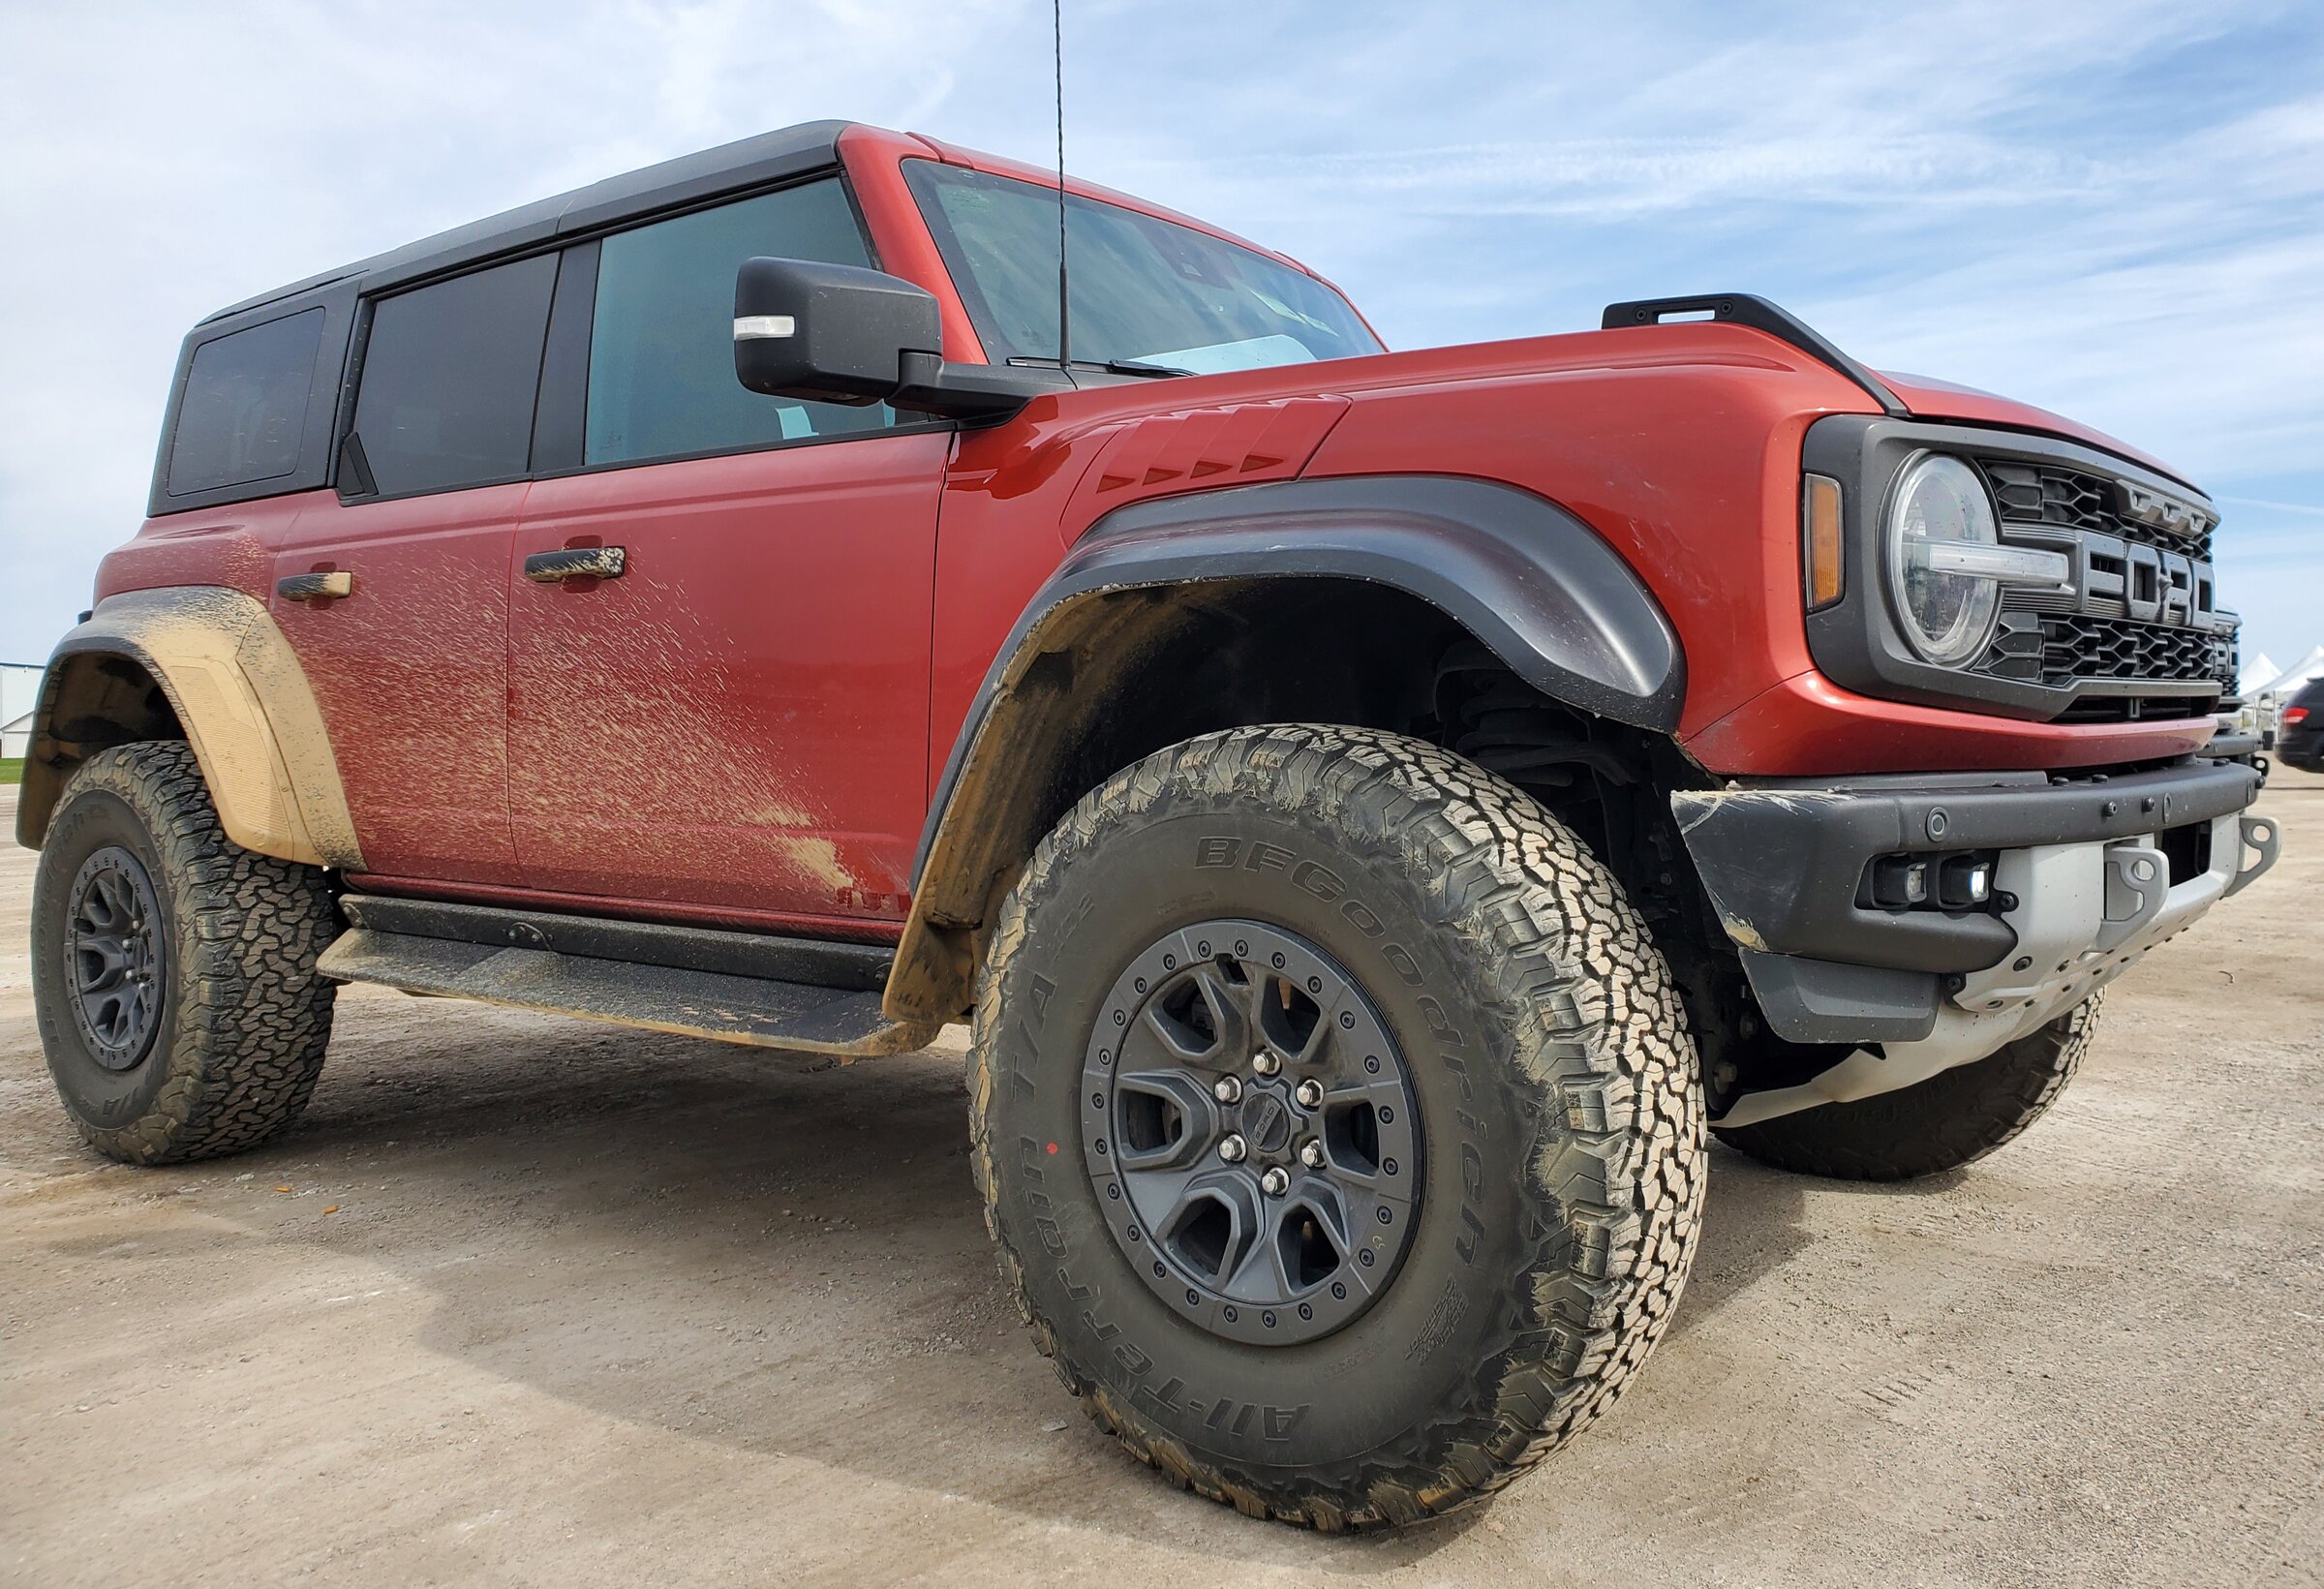 Ford Bronco 2 raptors in Port Huron today - Iconic Silver & Hot Pepper Red 20220430_103752